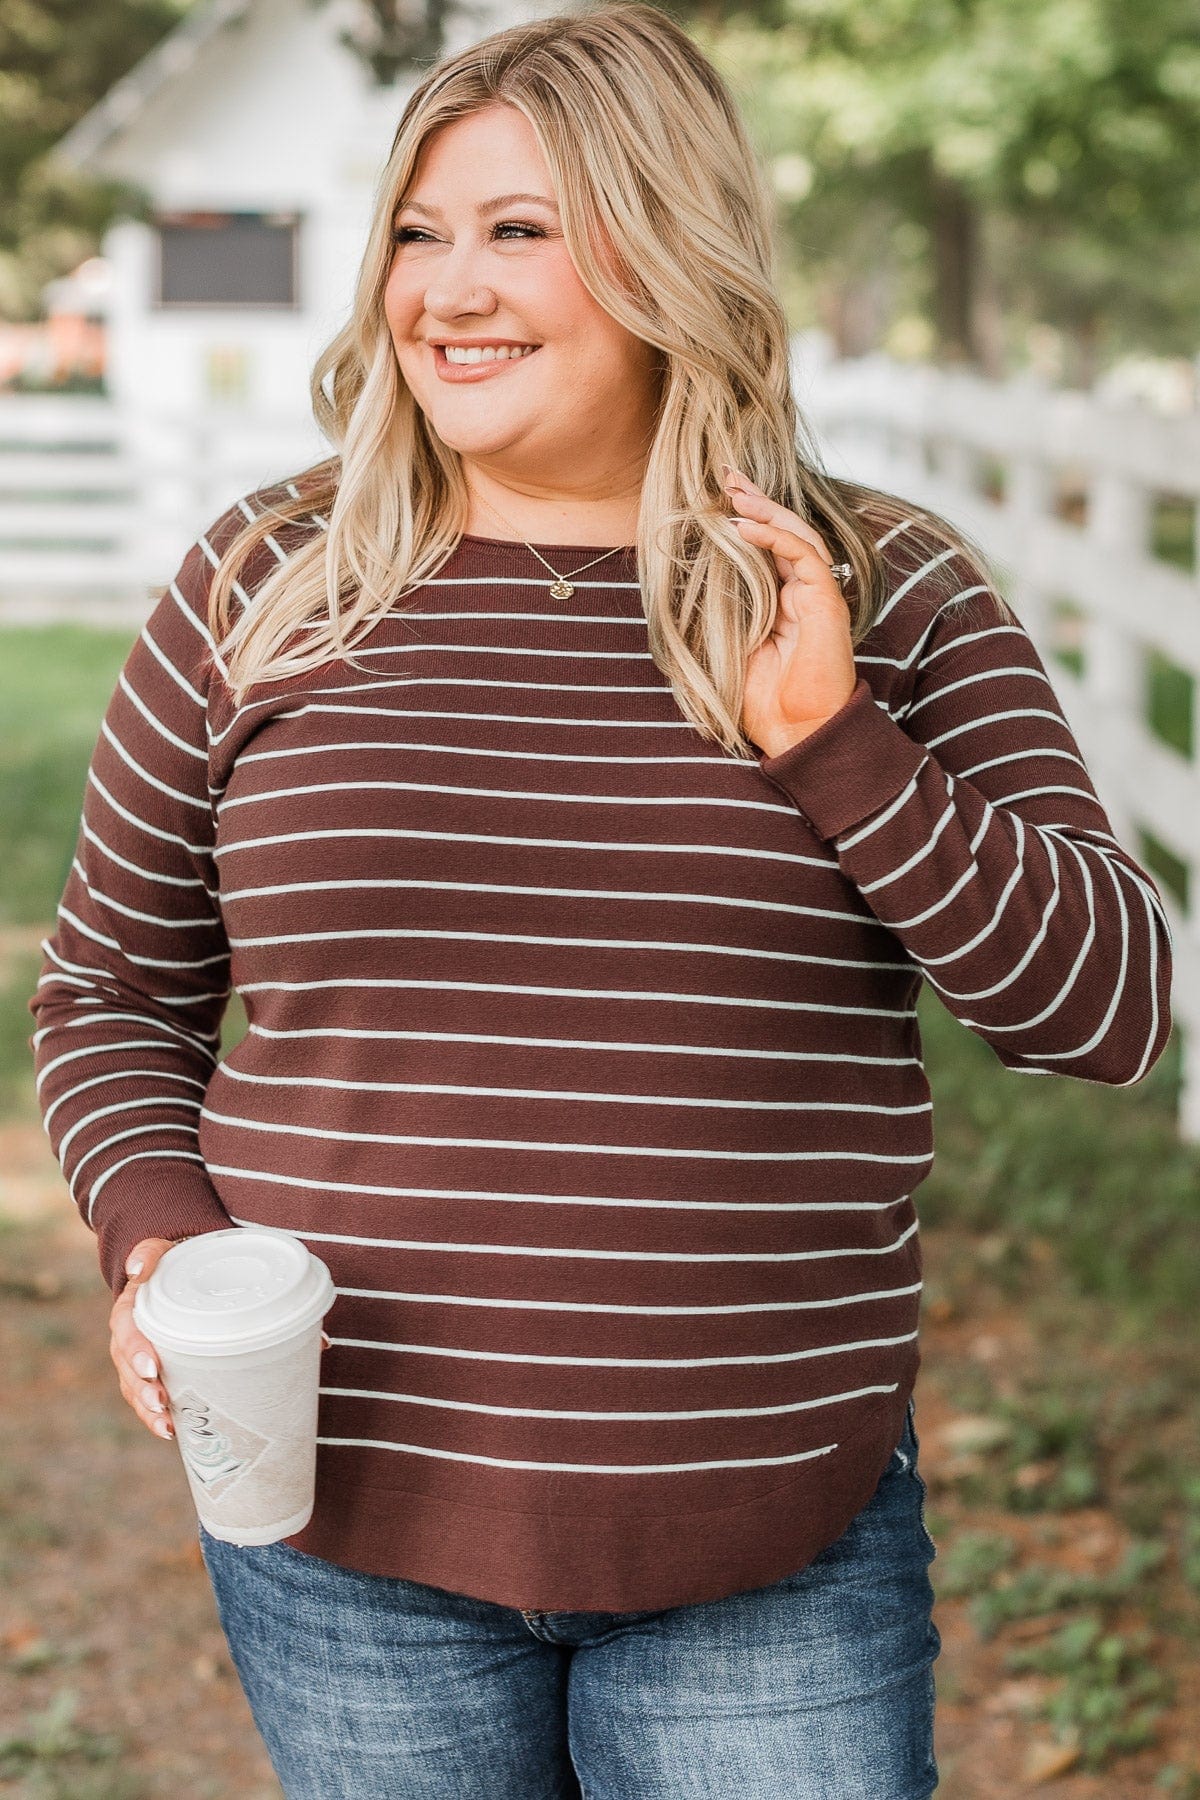 Days Like These Striped Sweater- Chocolate & Ivory